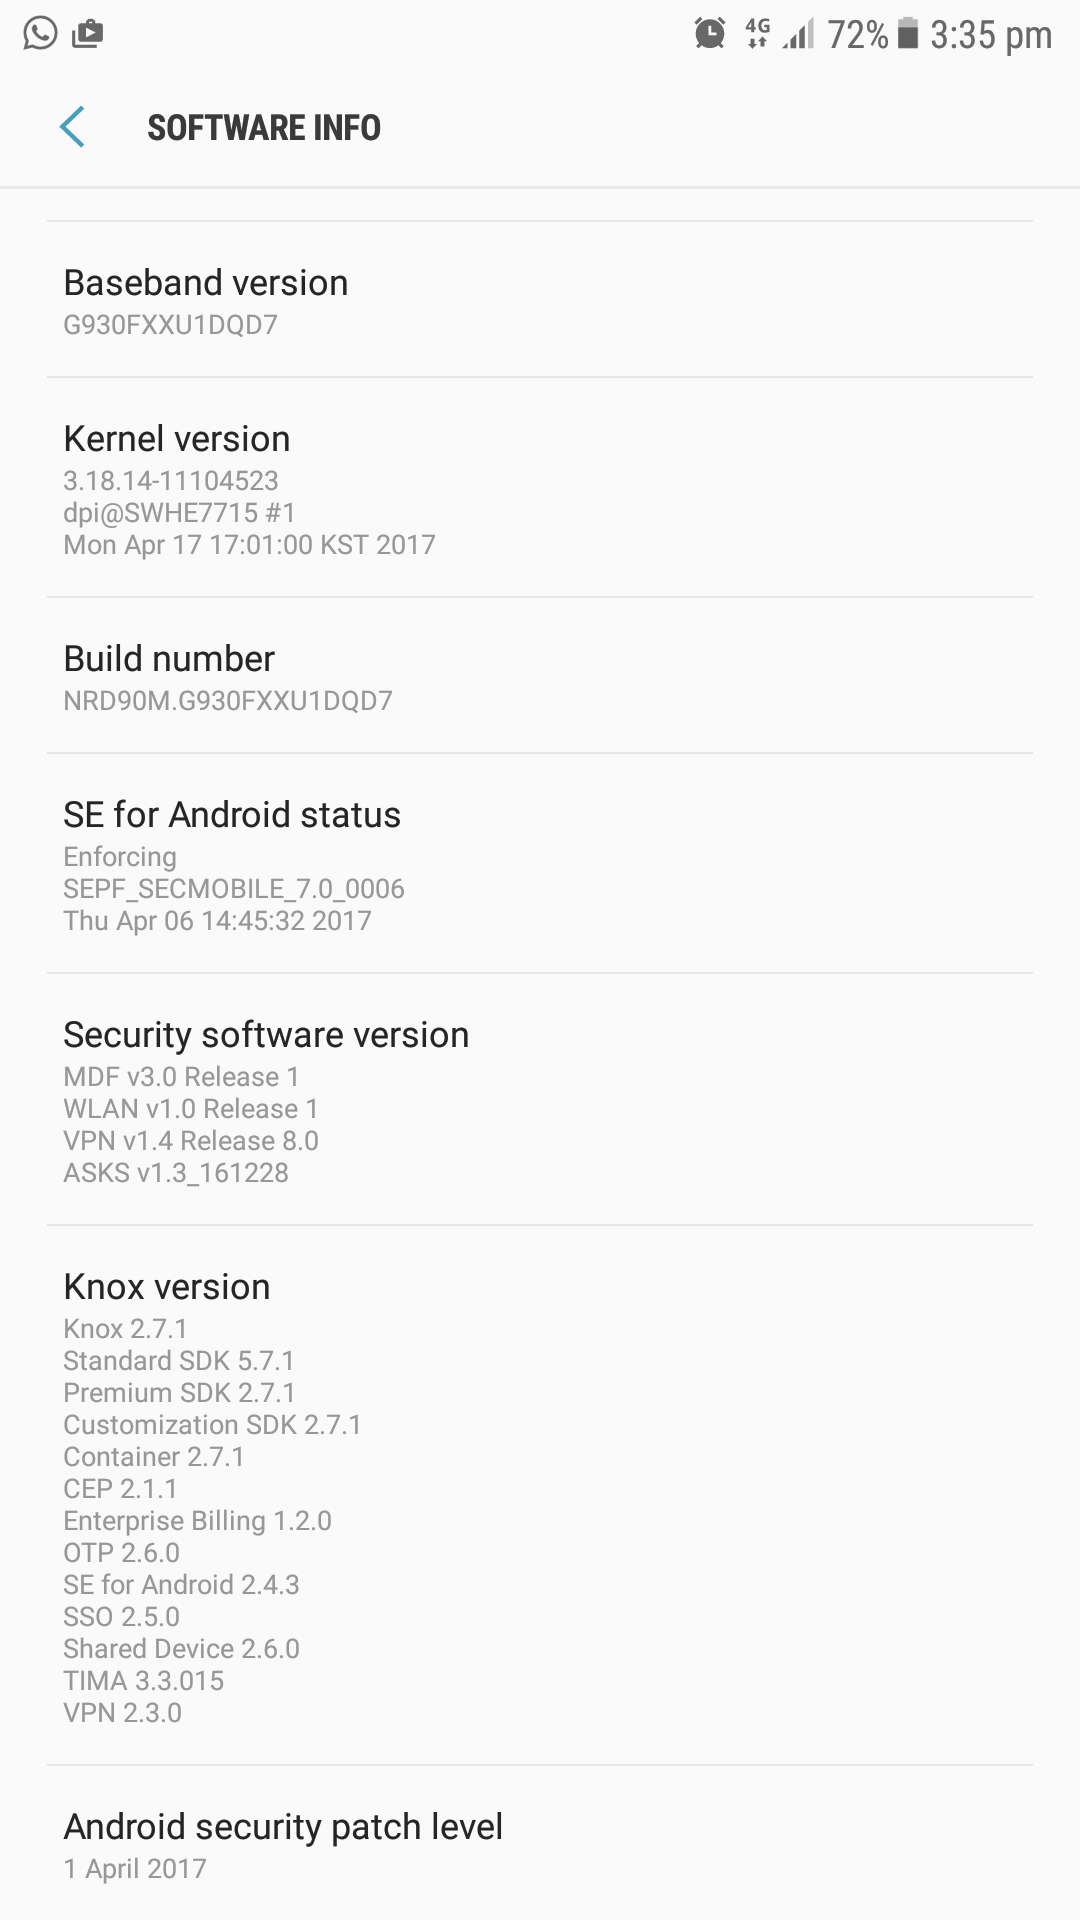 Samsung-Galaxy-S7-April-2017-Security-Patch-India.png